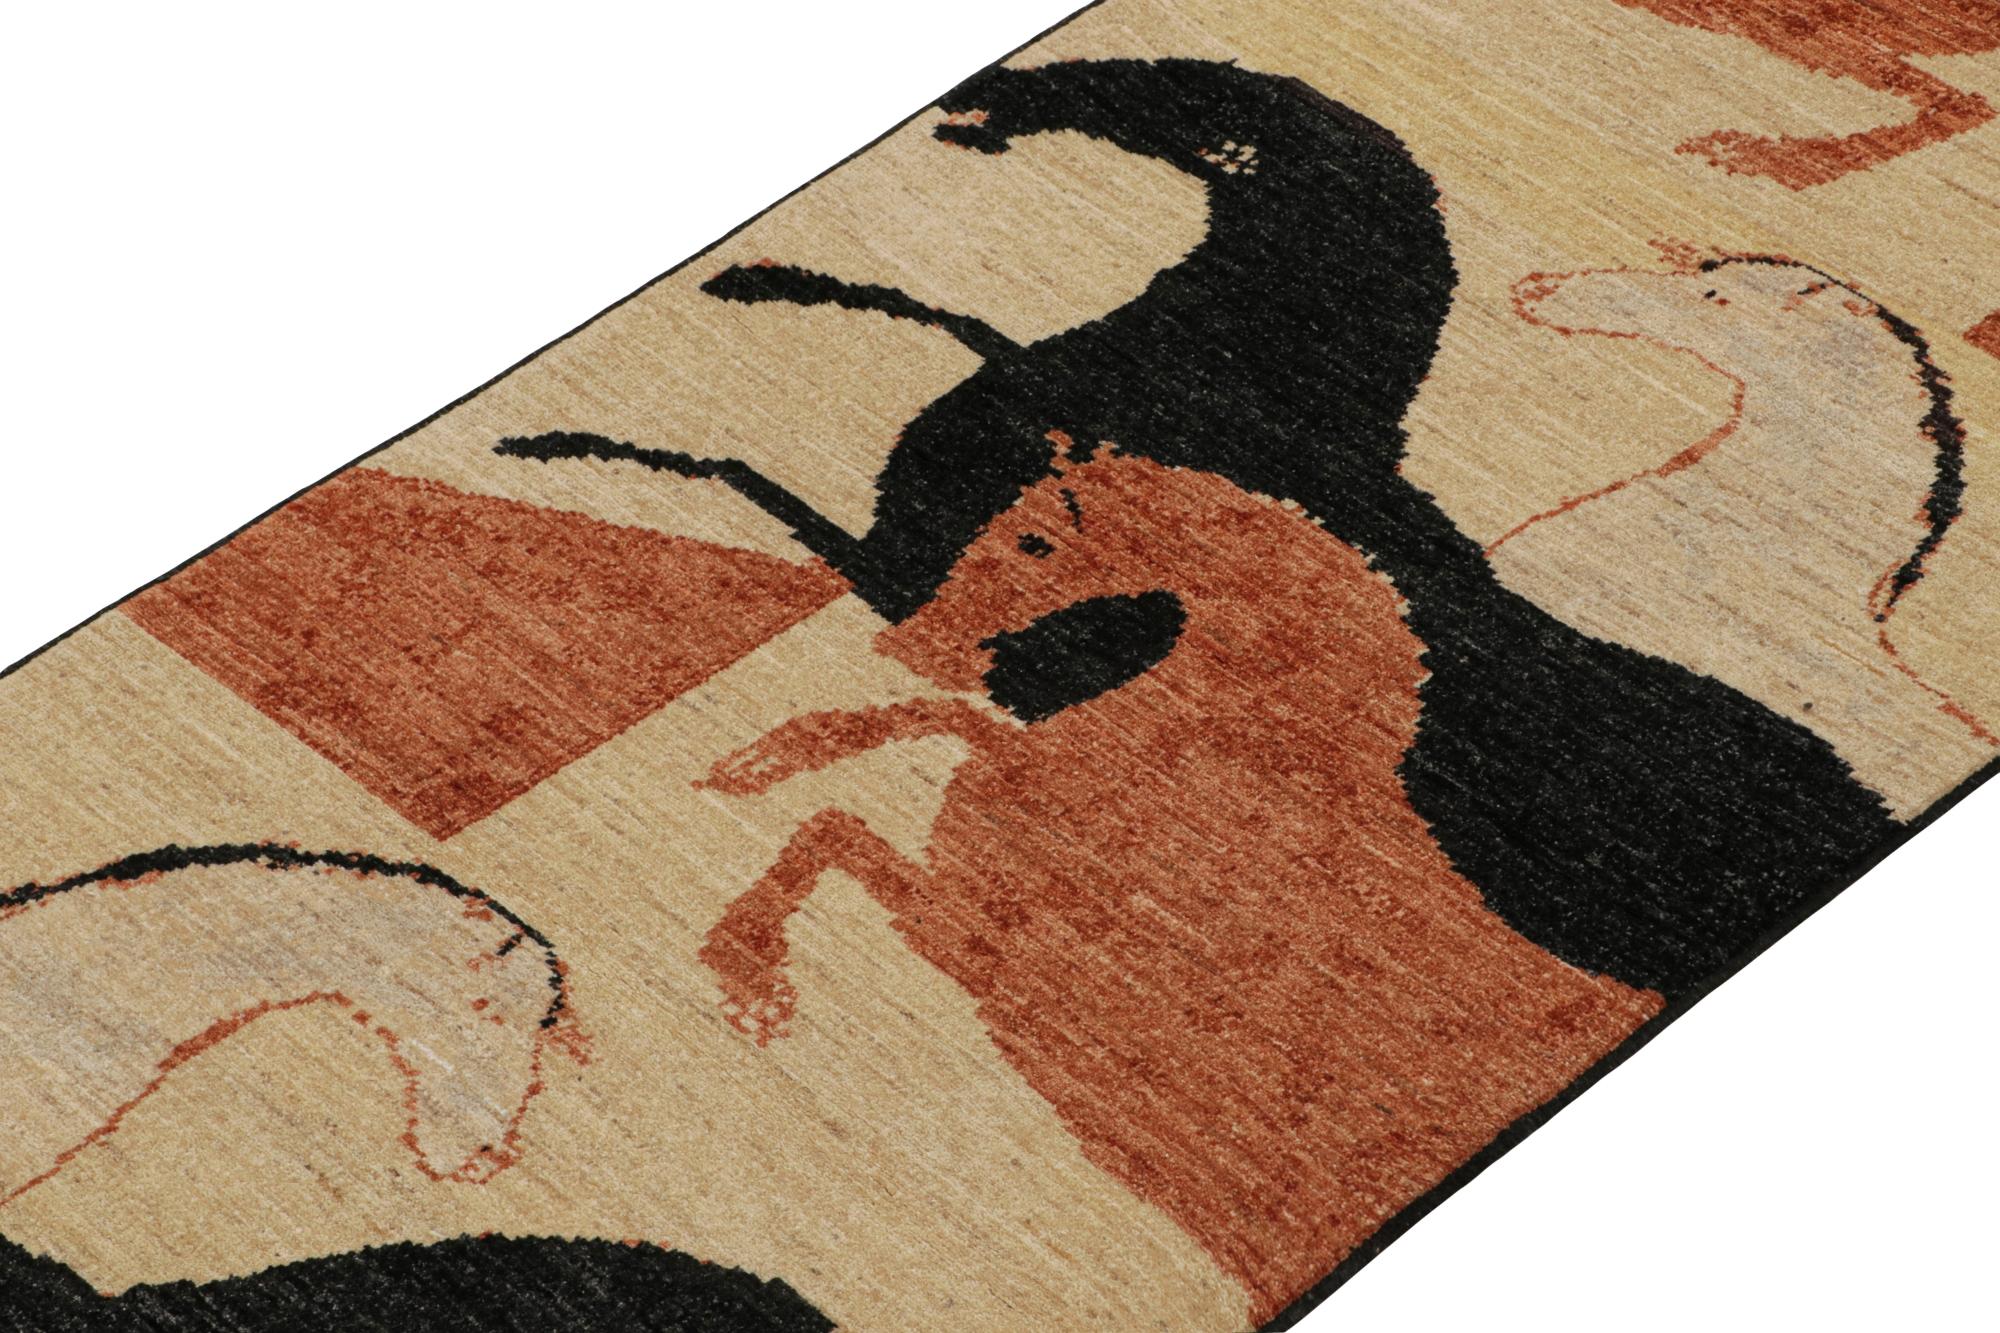 This new addition to Rug & Kilim’s Modern Classics collection is a 3x12 pictorial runner—a contemporary resurrection of one of the most collectible primitivist styles. 

Further on the Design:

Hand-knotted in wool, this piece is inspired by